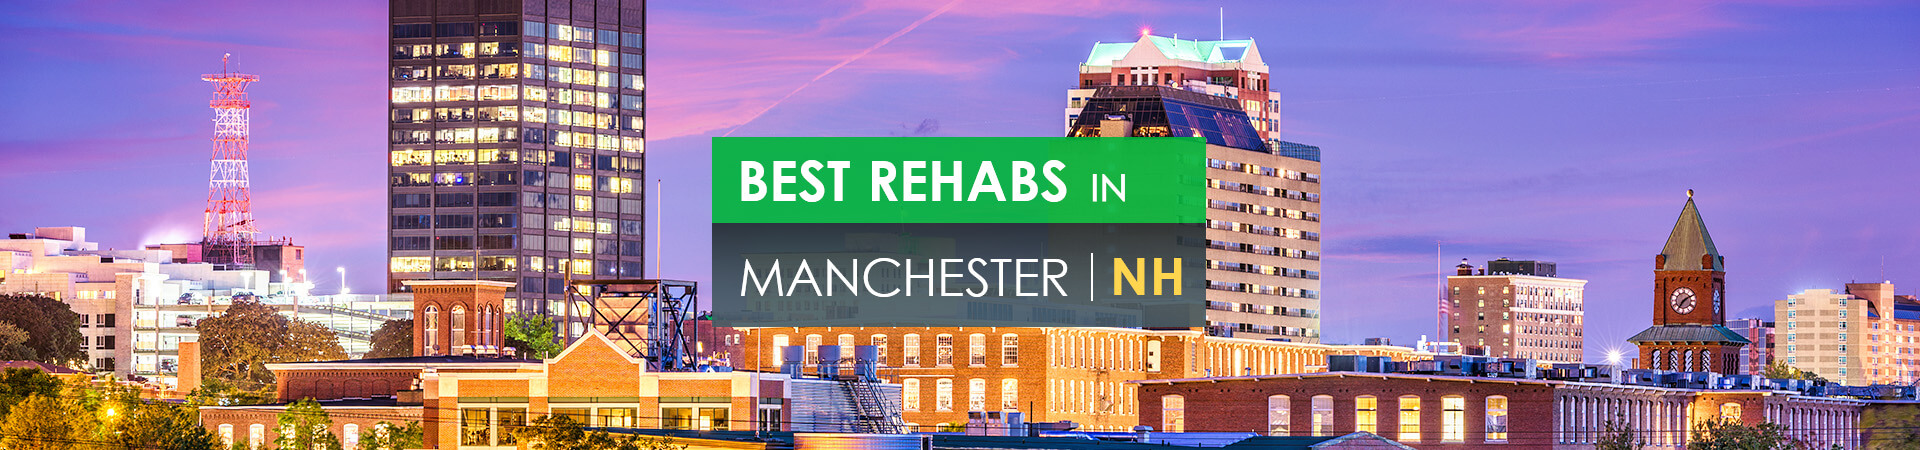 Best rehabs in Manchester, NH